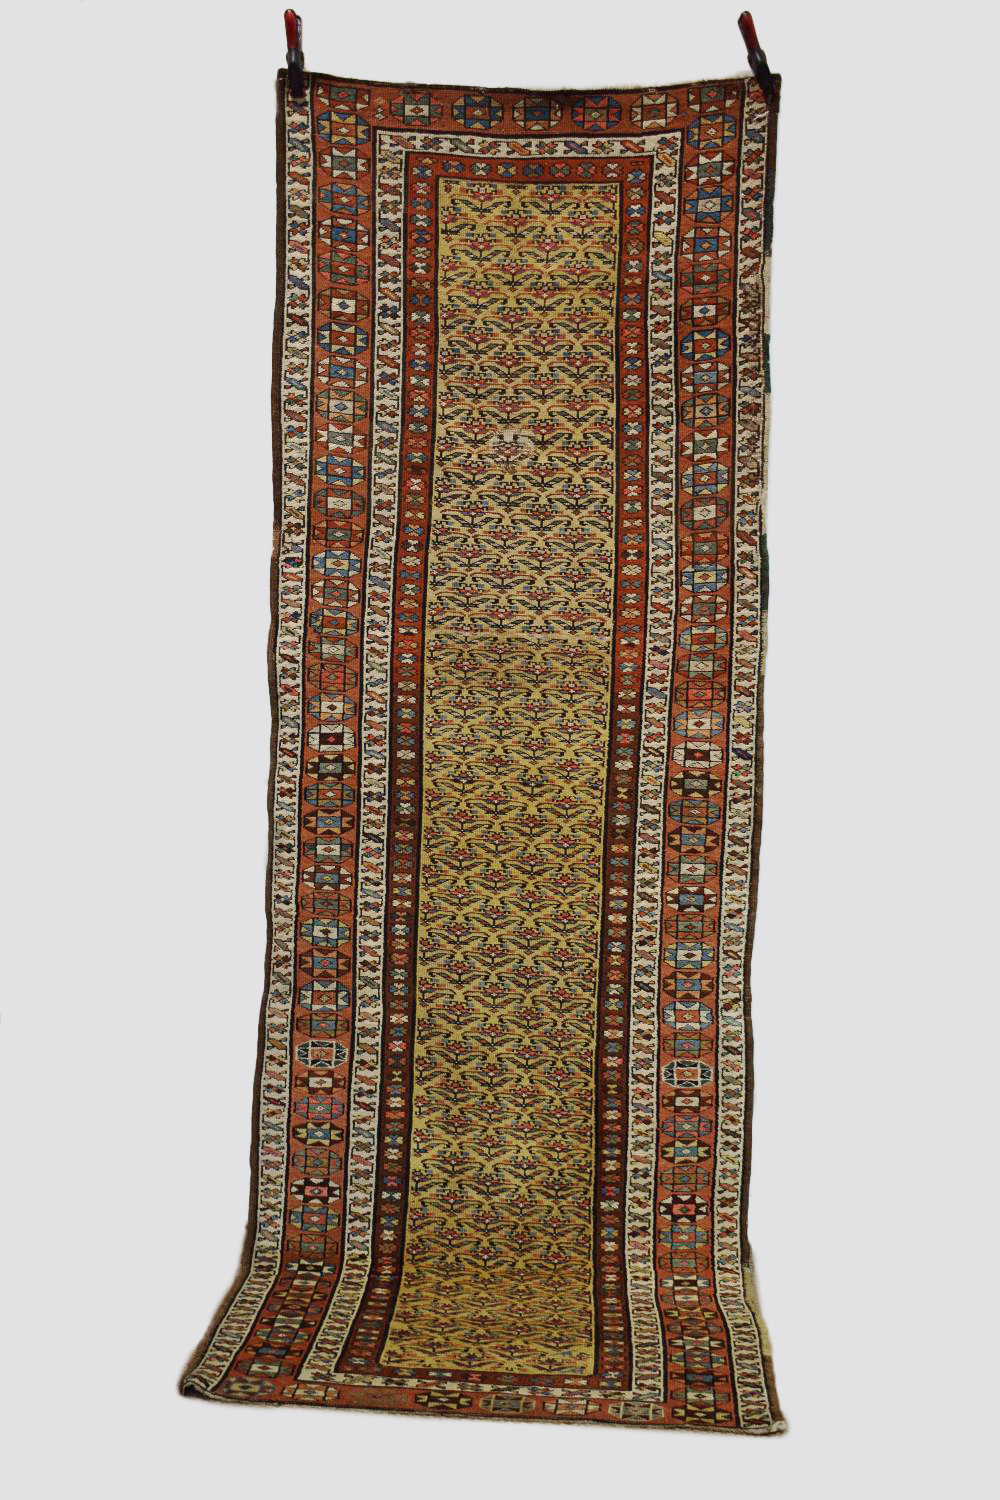 Kurdish runner, north west Persia, early 20th century, 10ft. X 3ft. 7in. 3.05m. X 1.09m. Overall